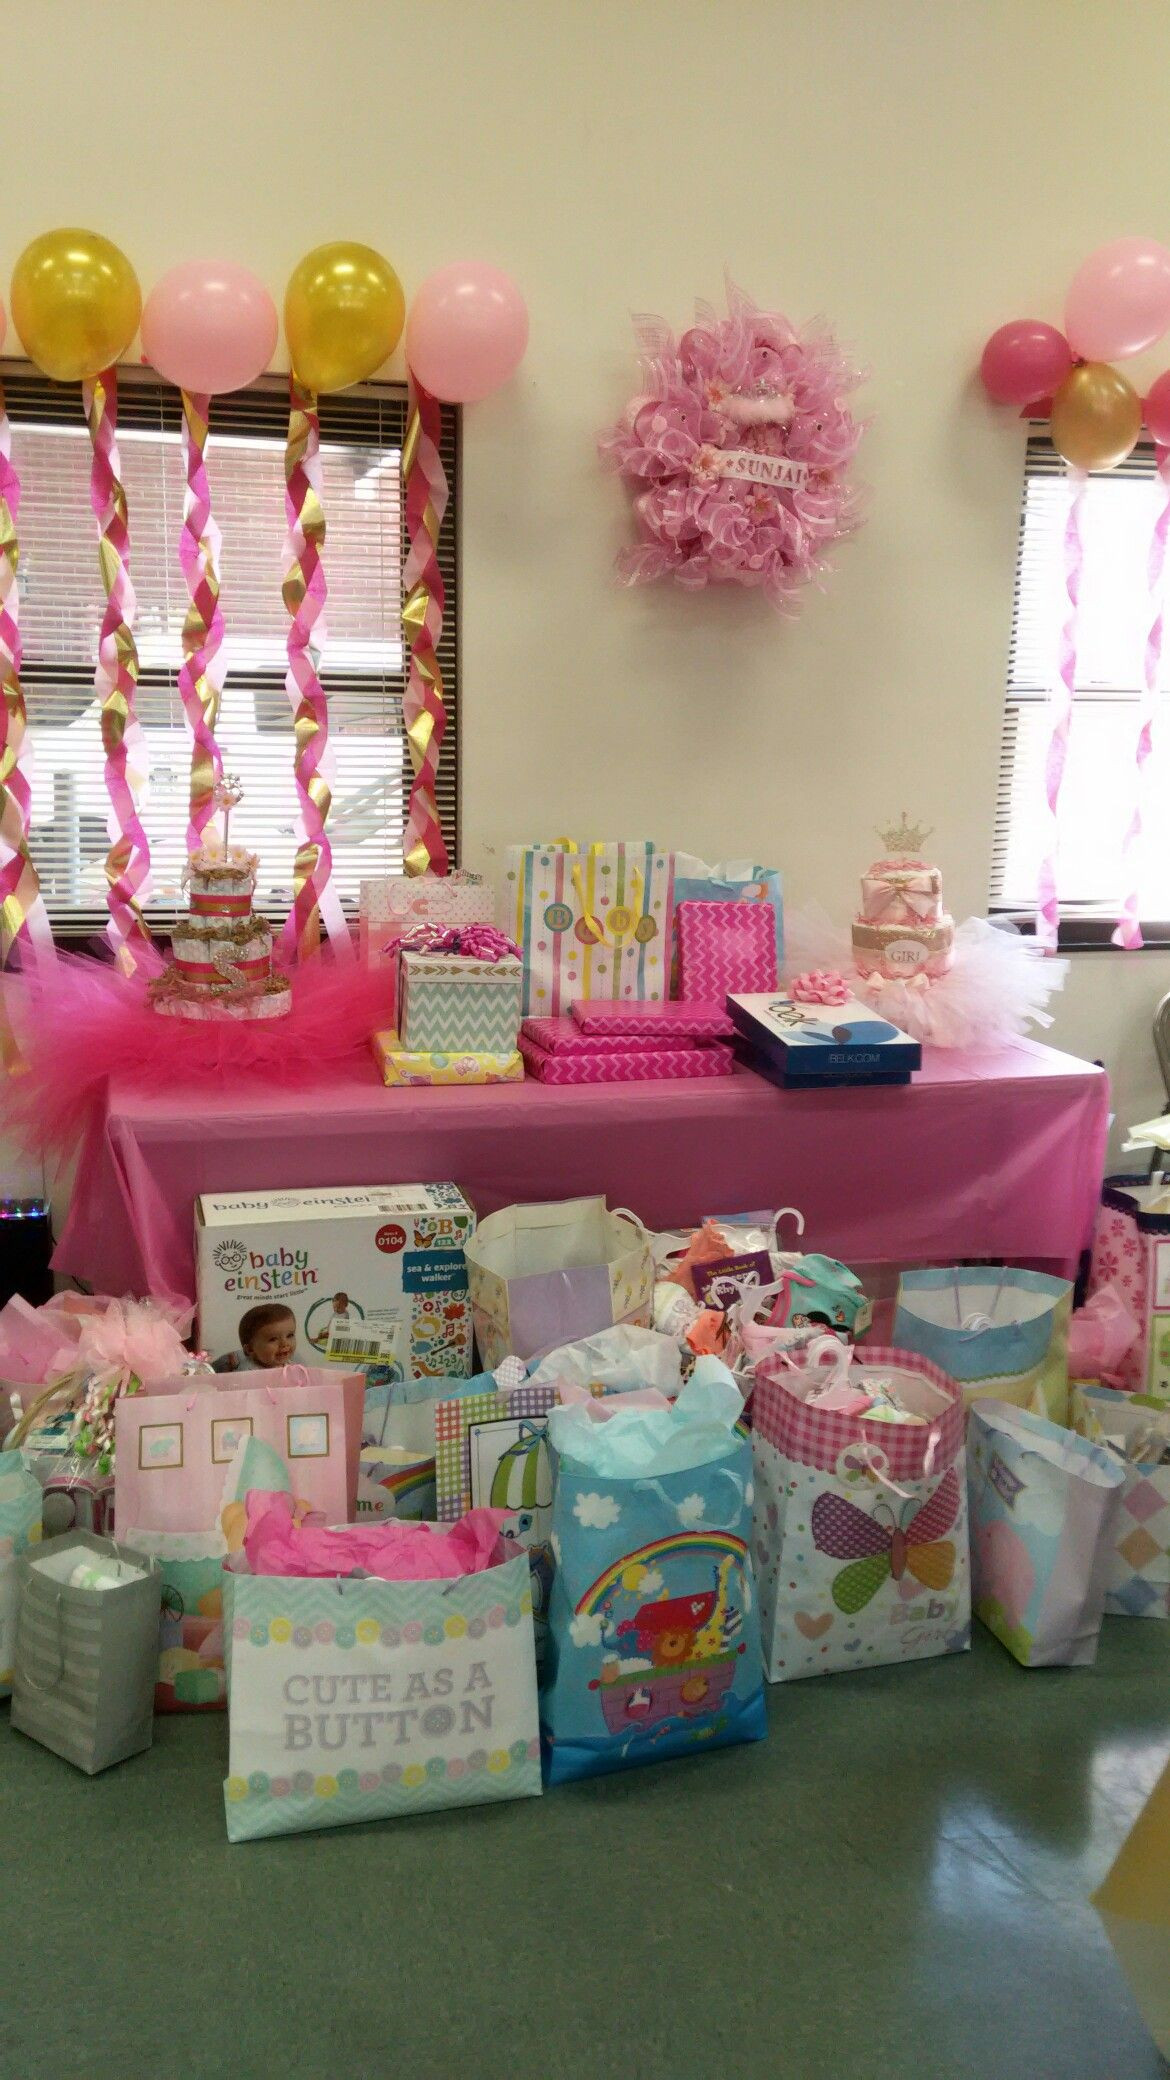 Gift Table Baby Shower Ideas
 My niece s baby shower t table in 2019